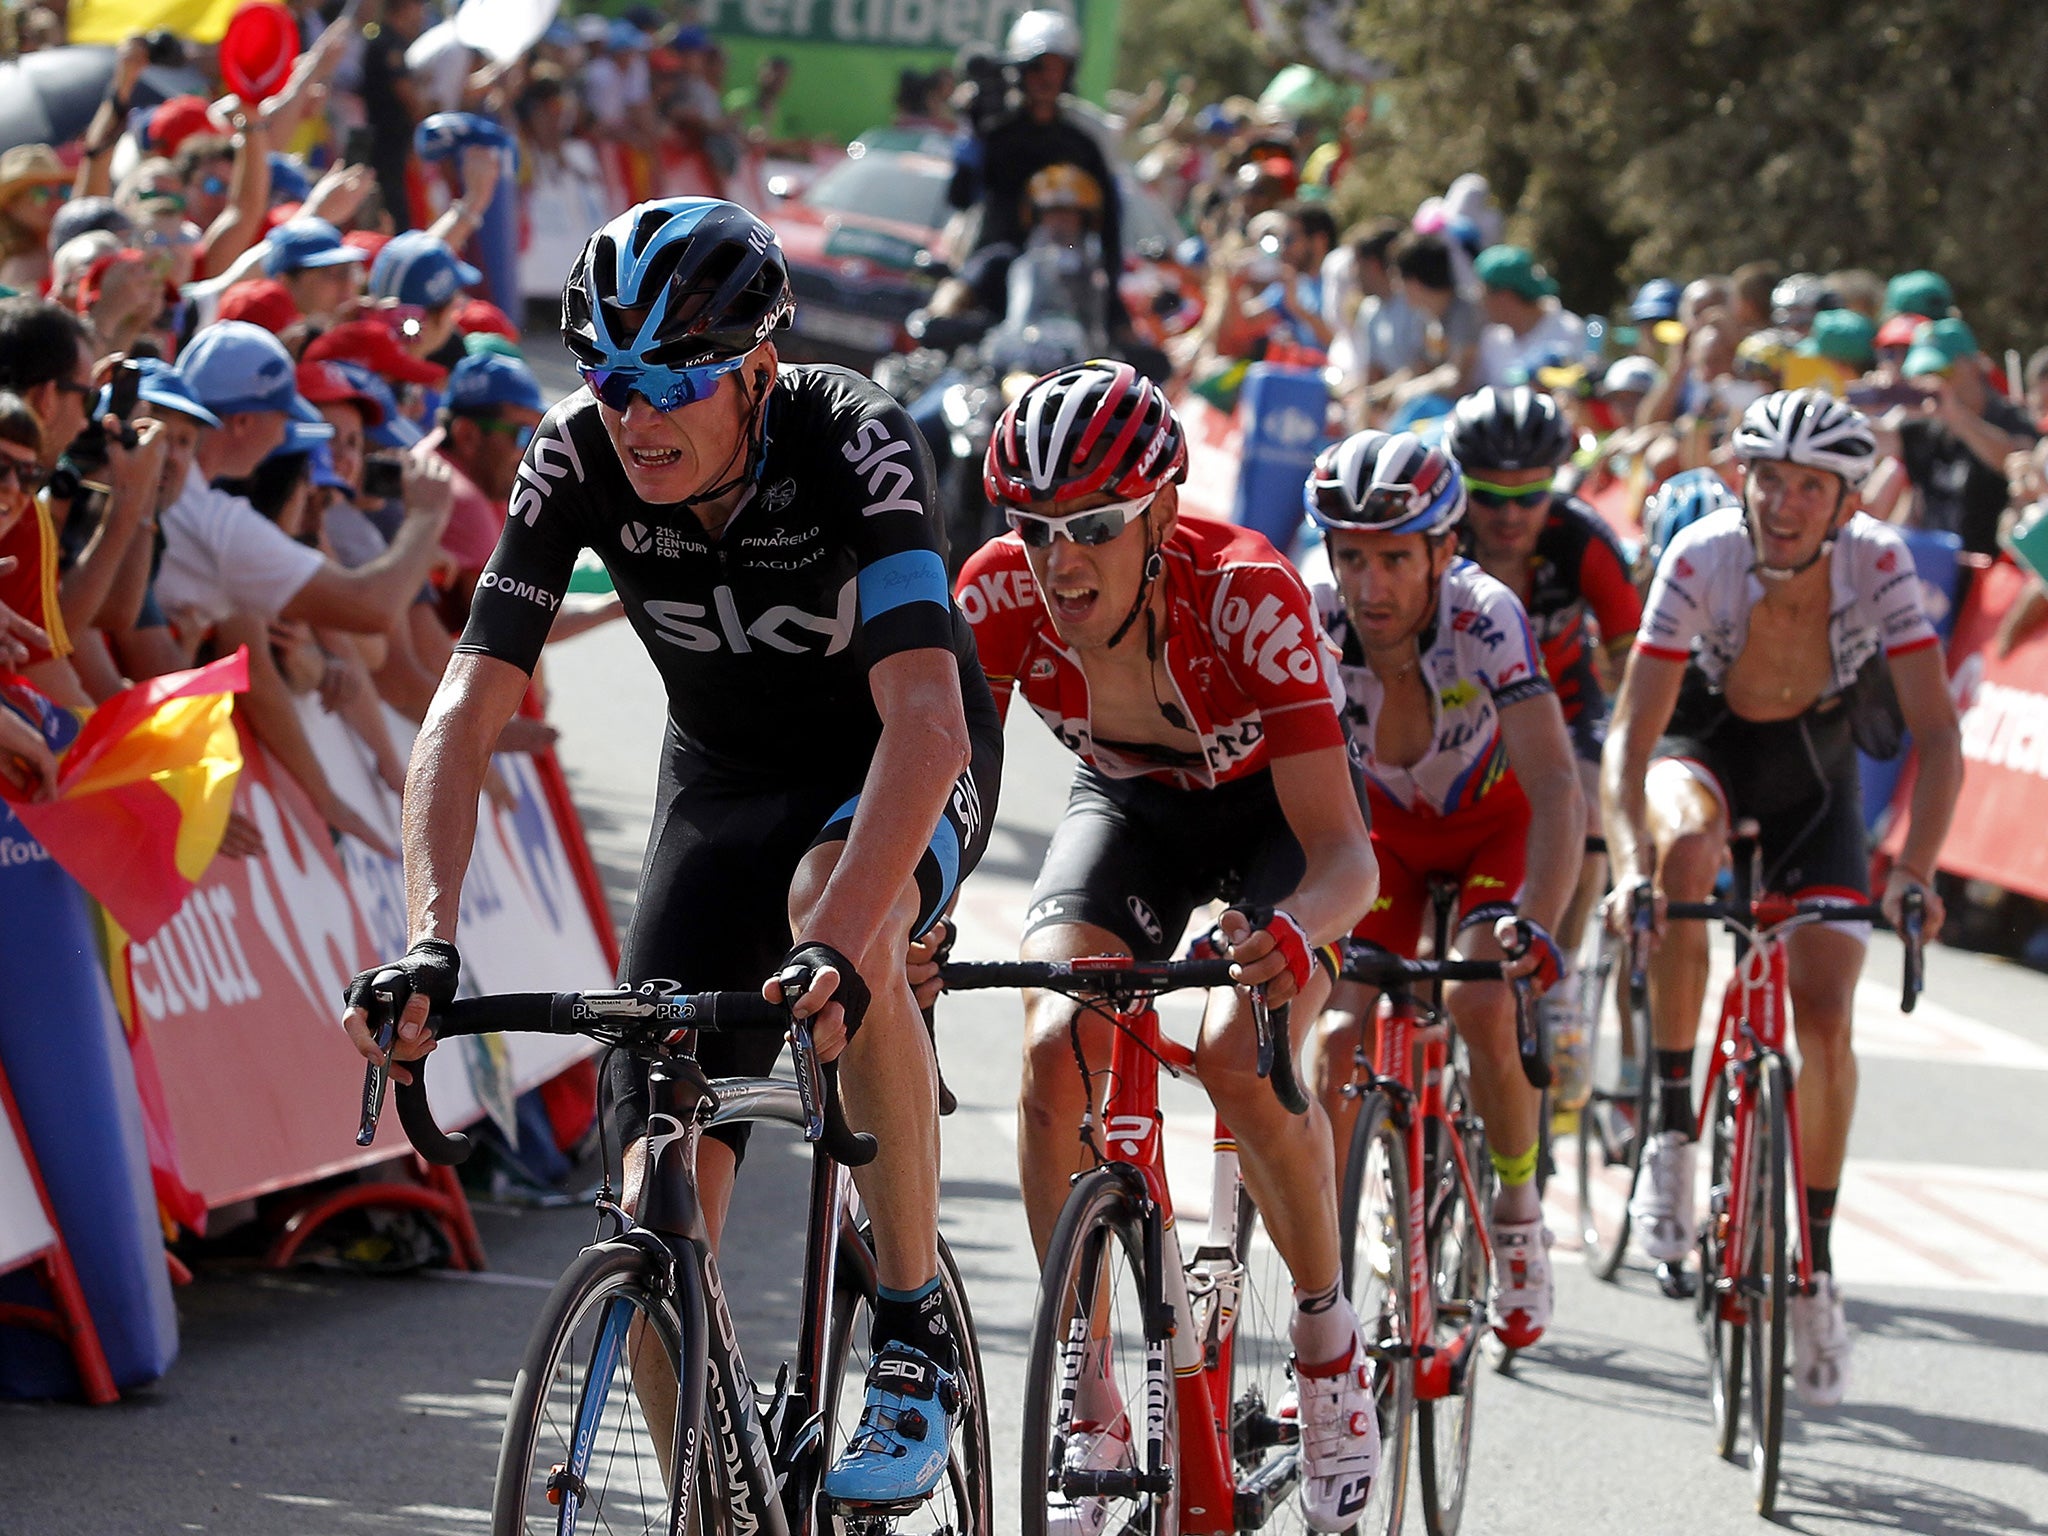 Team Sky leader Chris Froome is 1 minute 22 seconds behind the race leader in the Vuelta a España